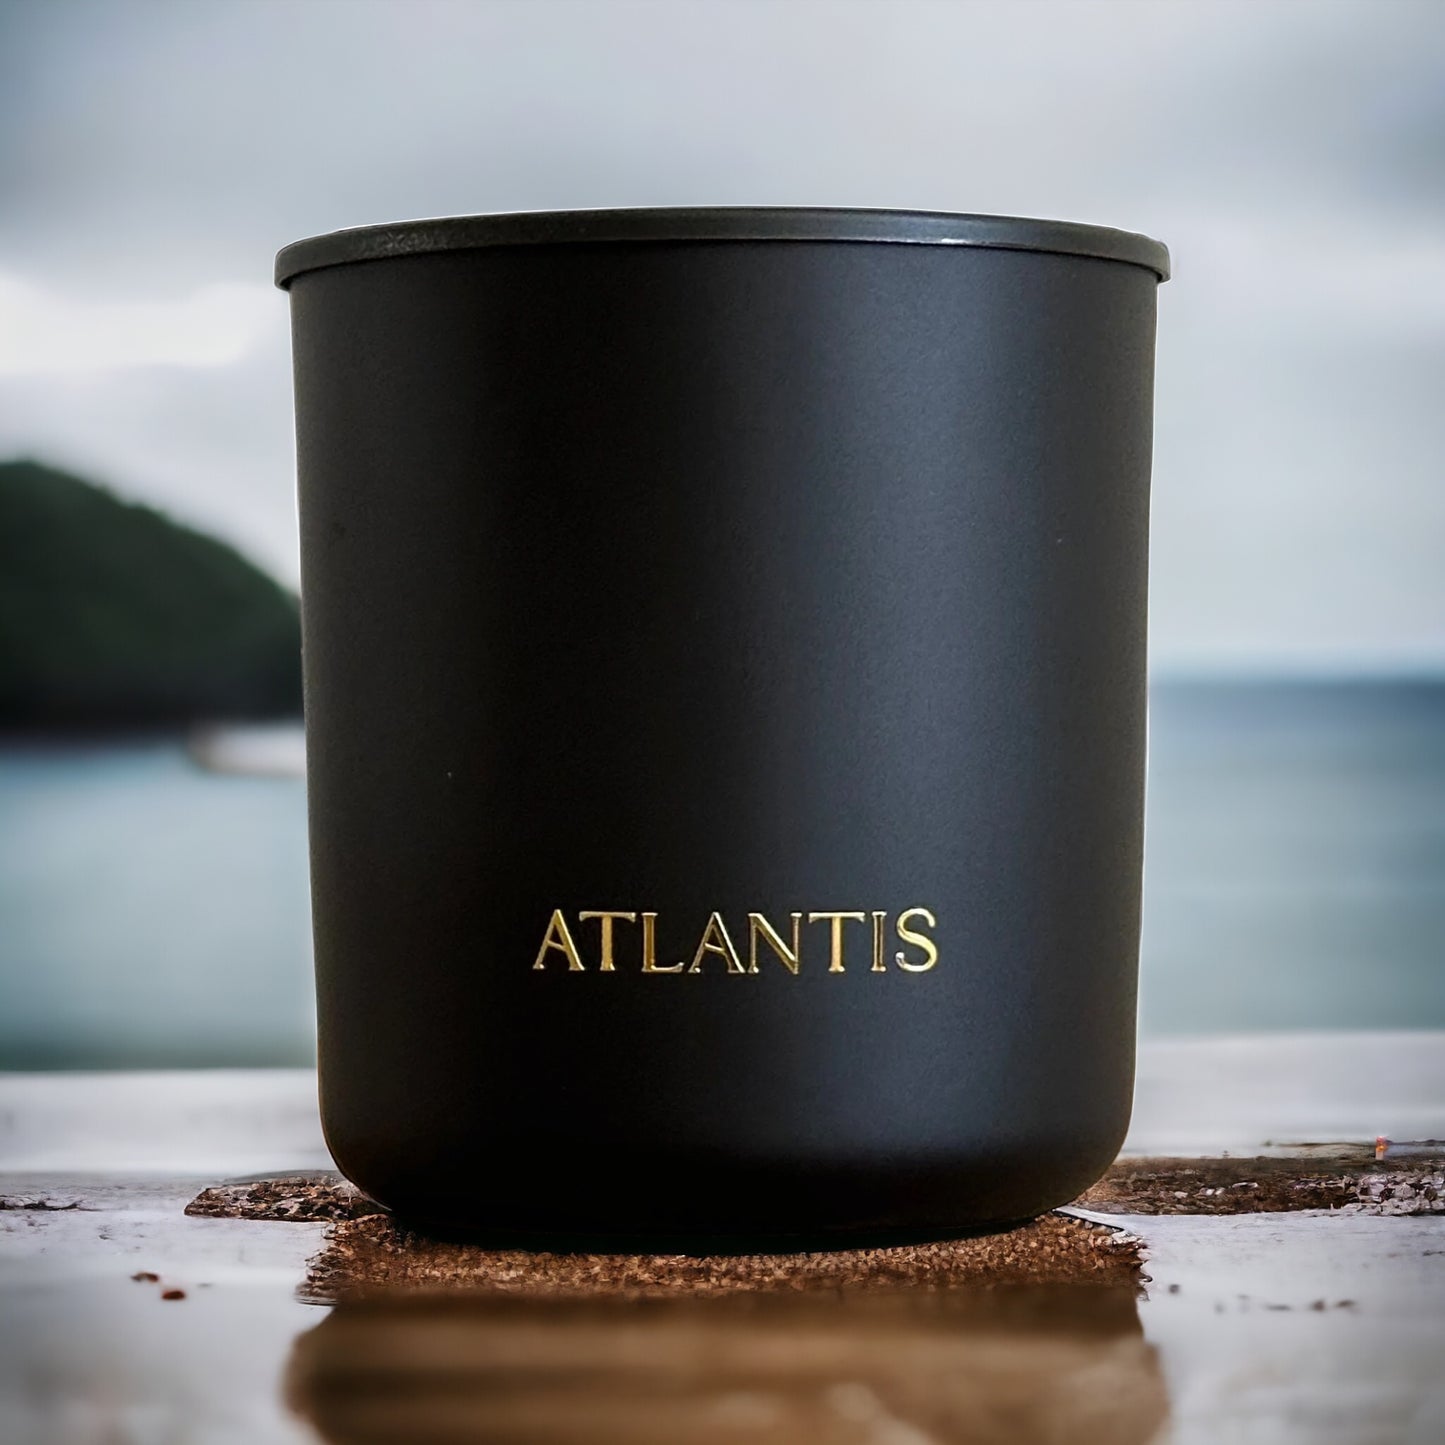 Atlantis Scented Candle - 8 oz